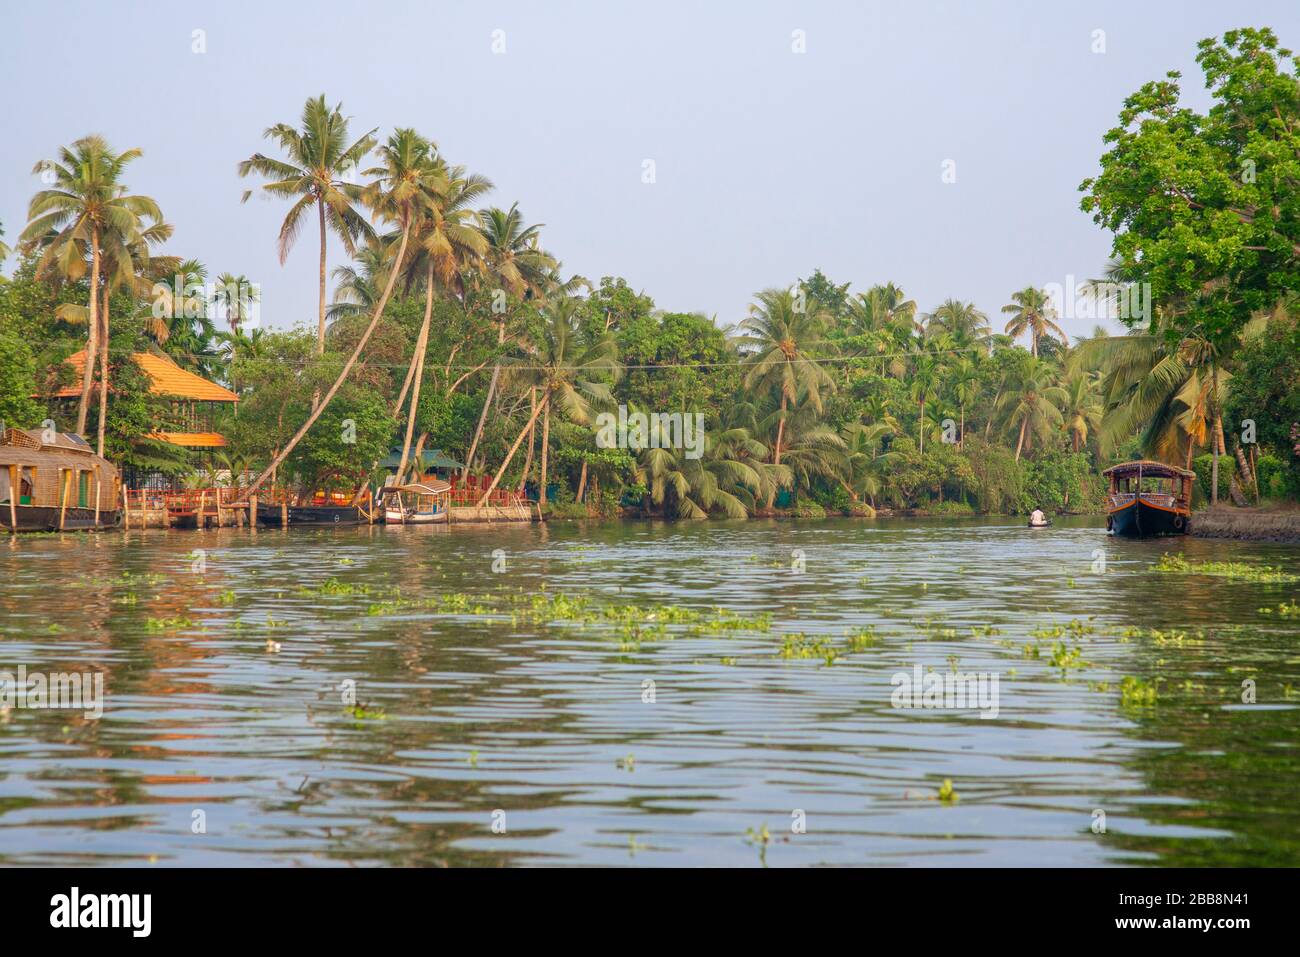 Alleppey, Kerala, India - March 30, 2018: Backwaters canal. Taken in the morning with only one man seen from far away. Stock Photo